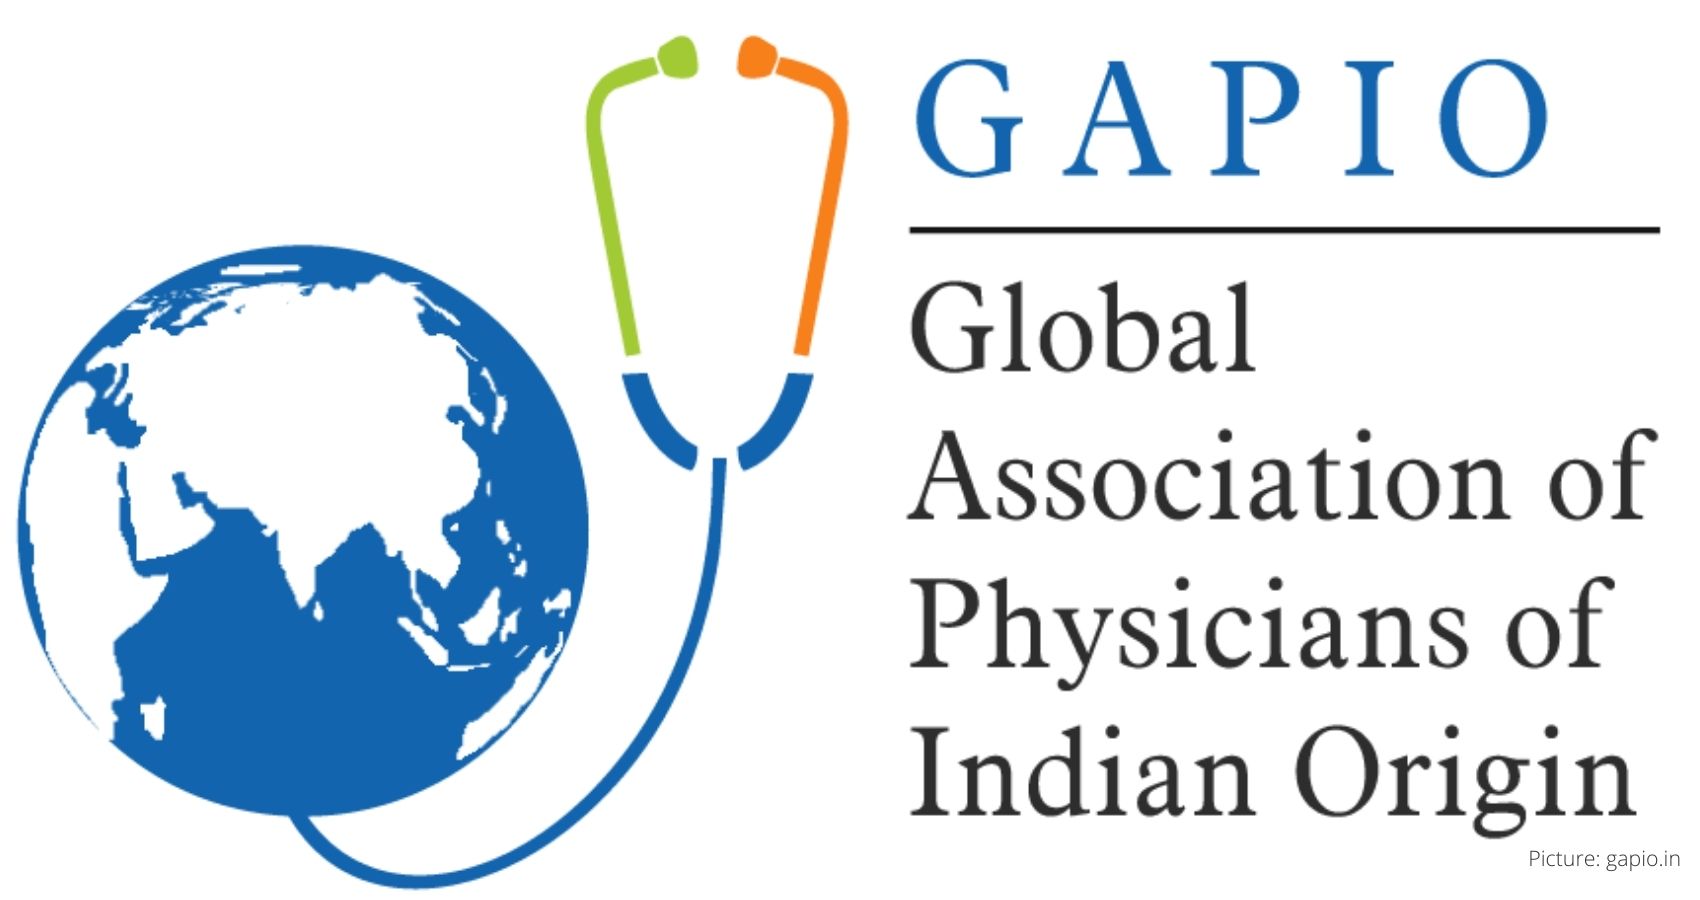 Feature and Cover Global Gathering of Physicians GAPIO Conference 2024 Highlights Excellence in Medicine and Healthcare Innovations